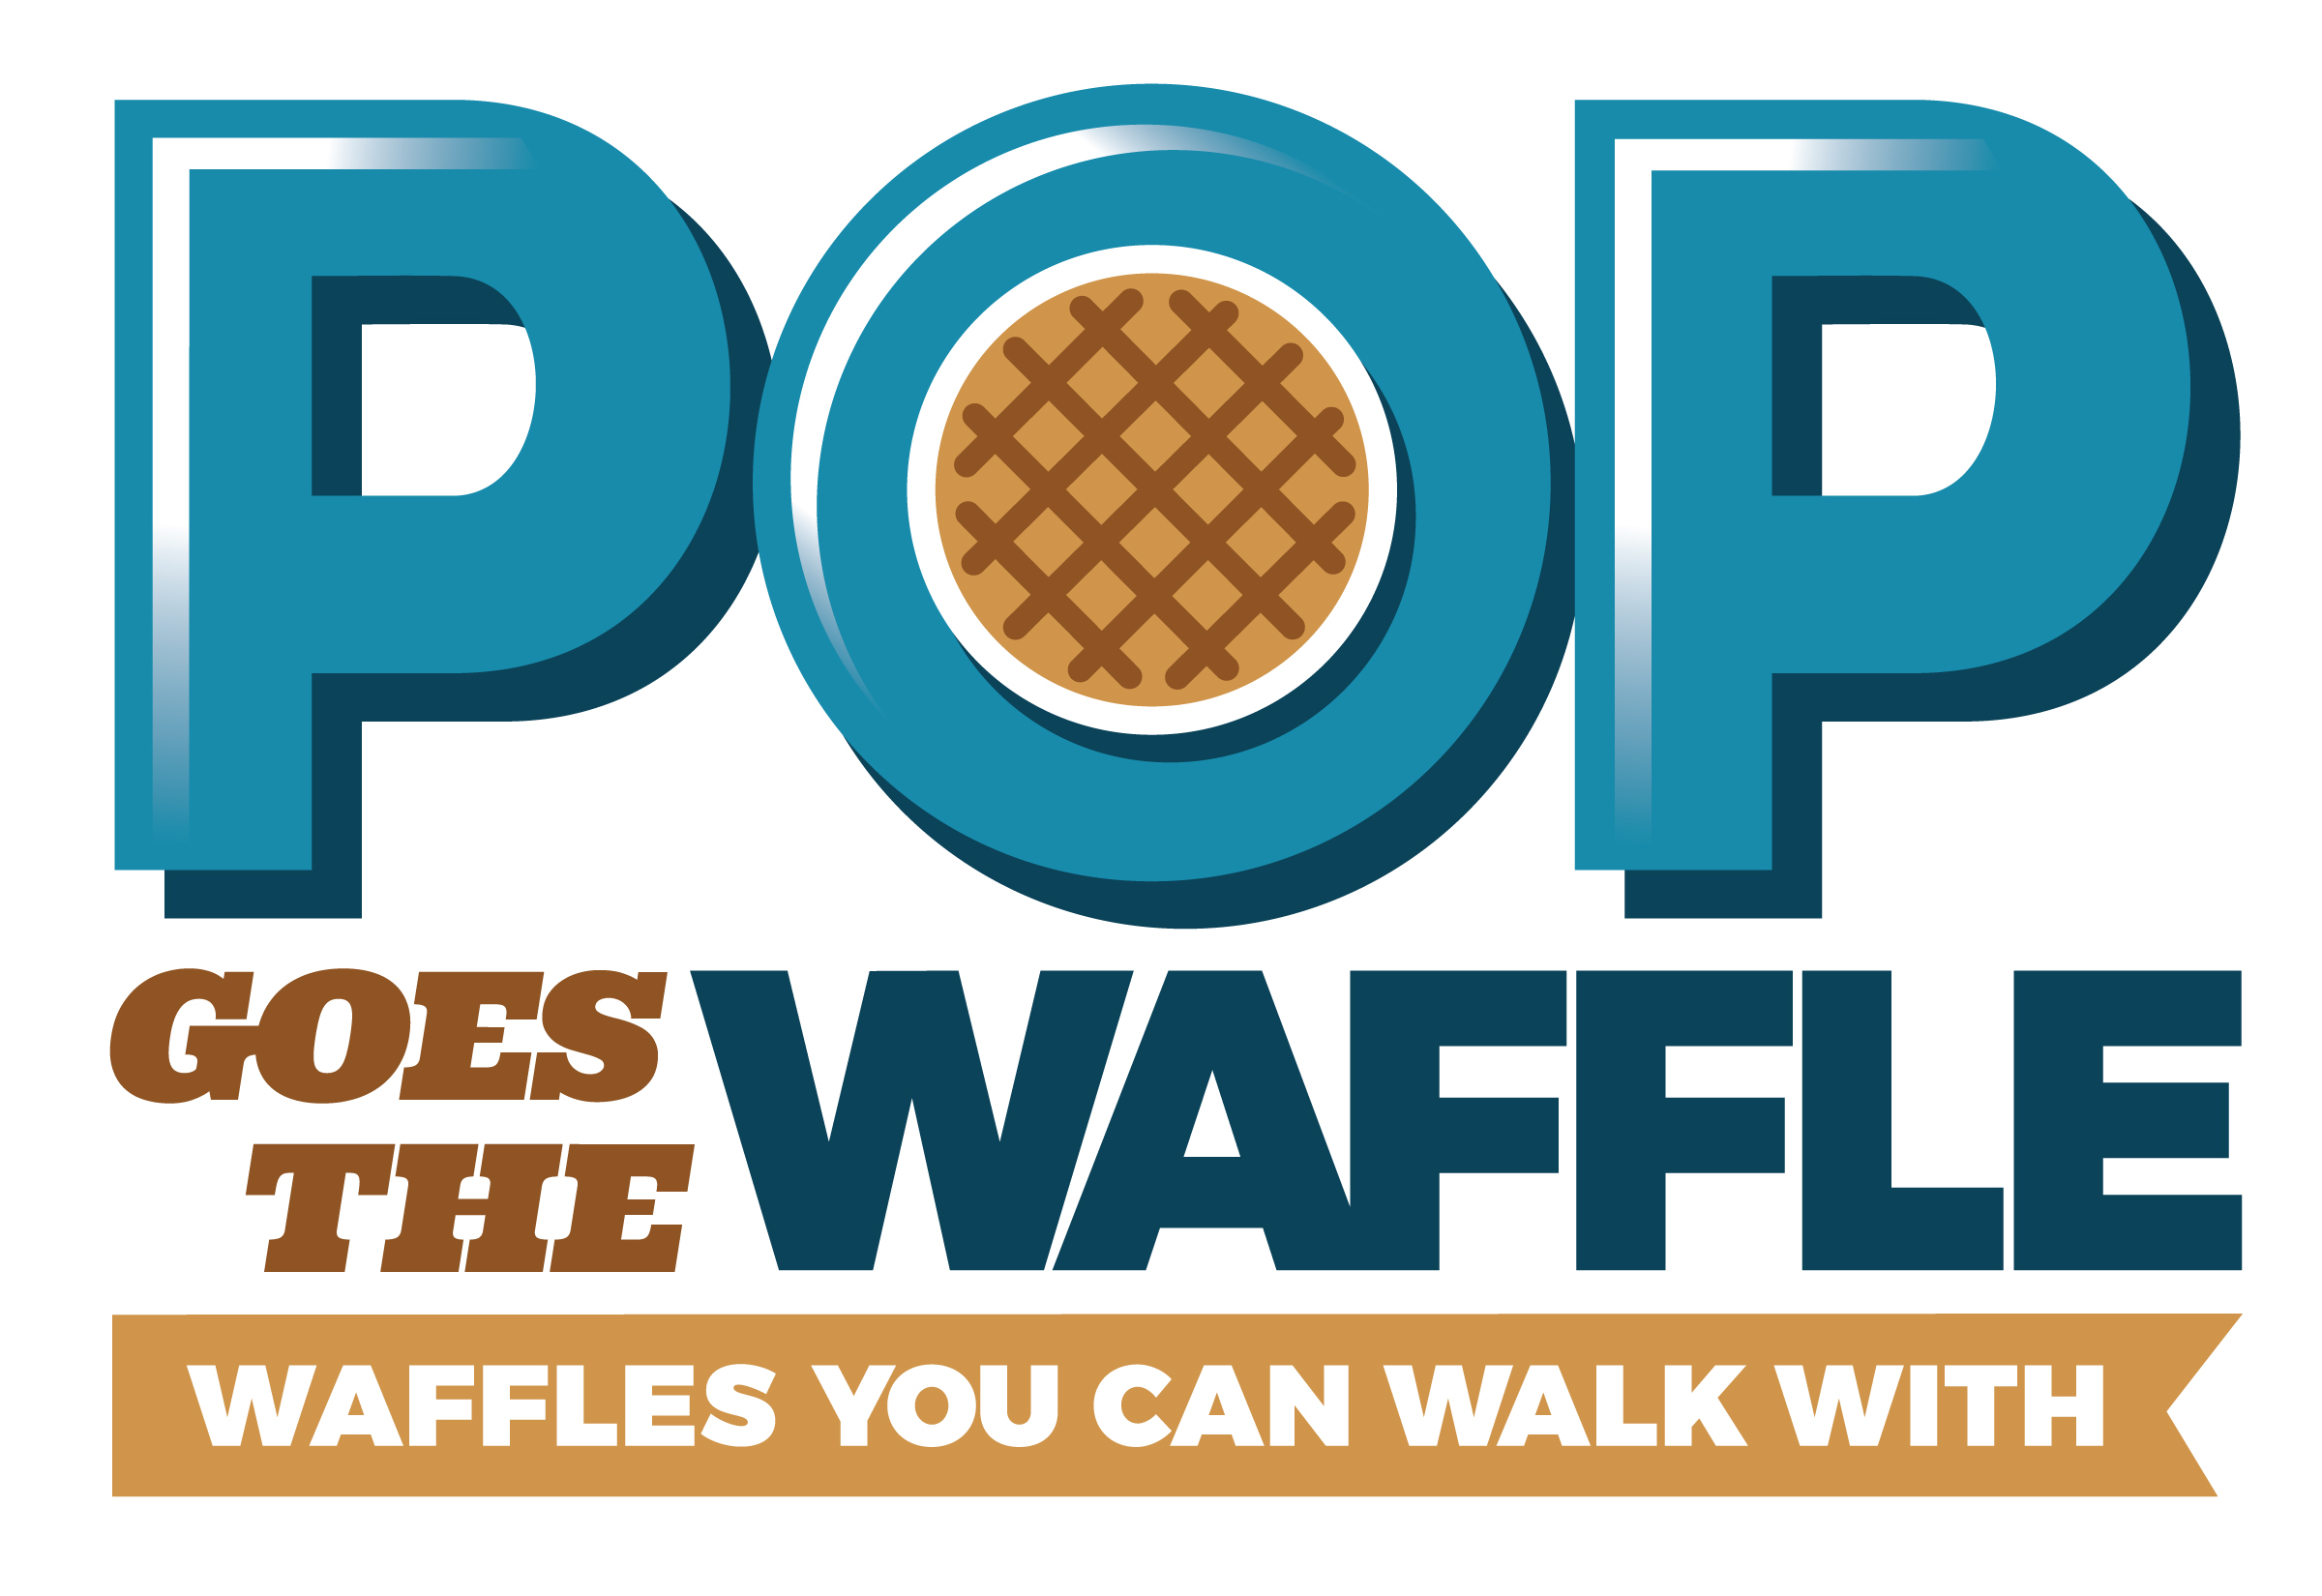 Pop Goes the Waffle